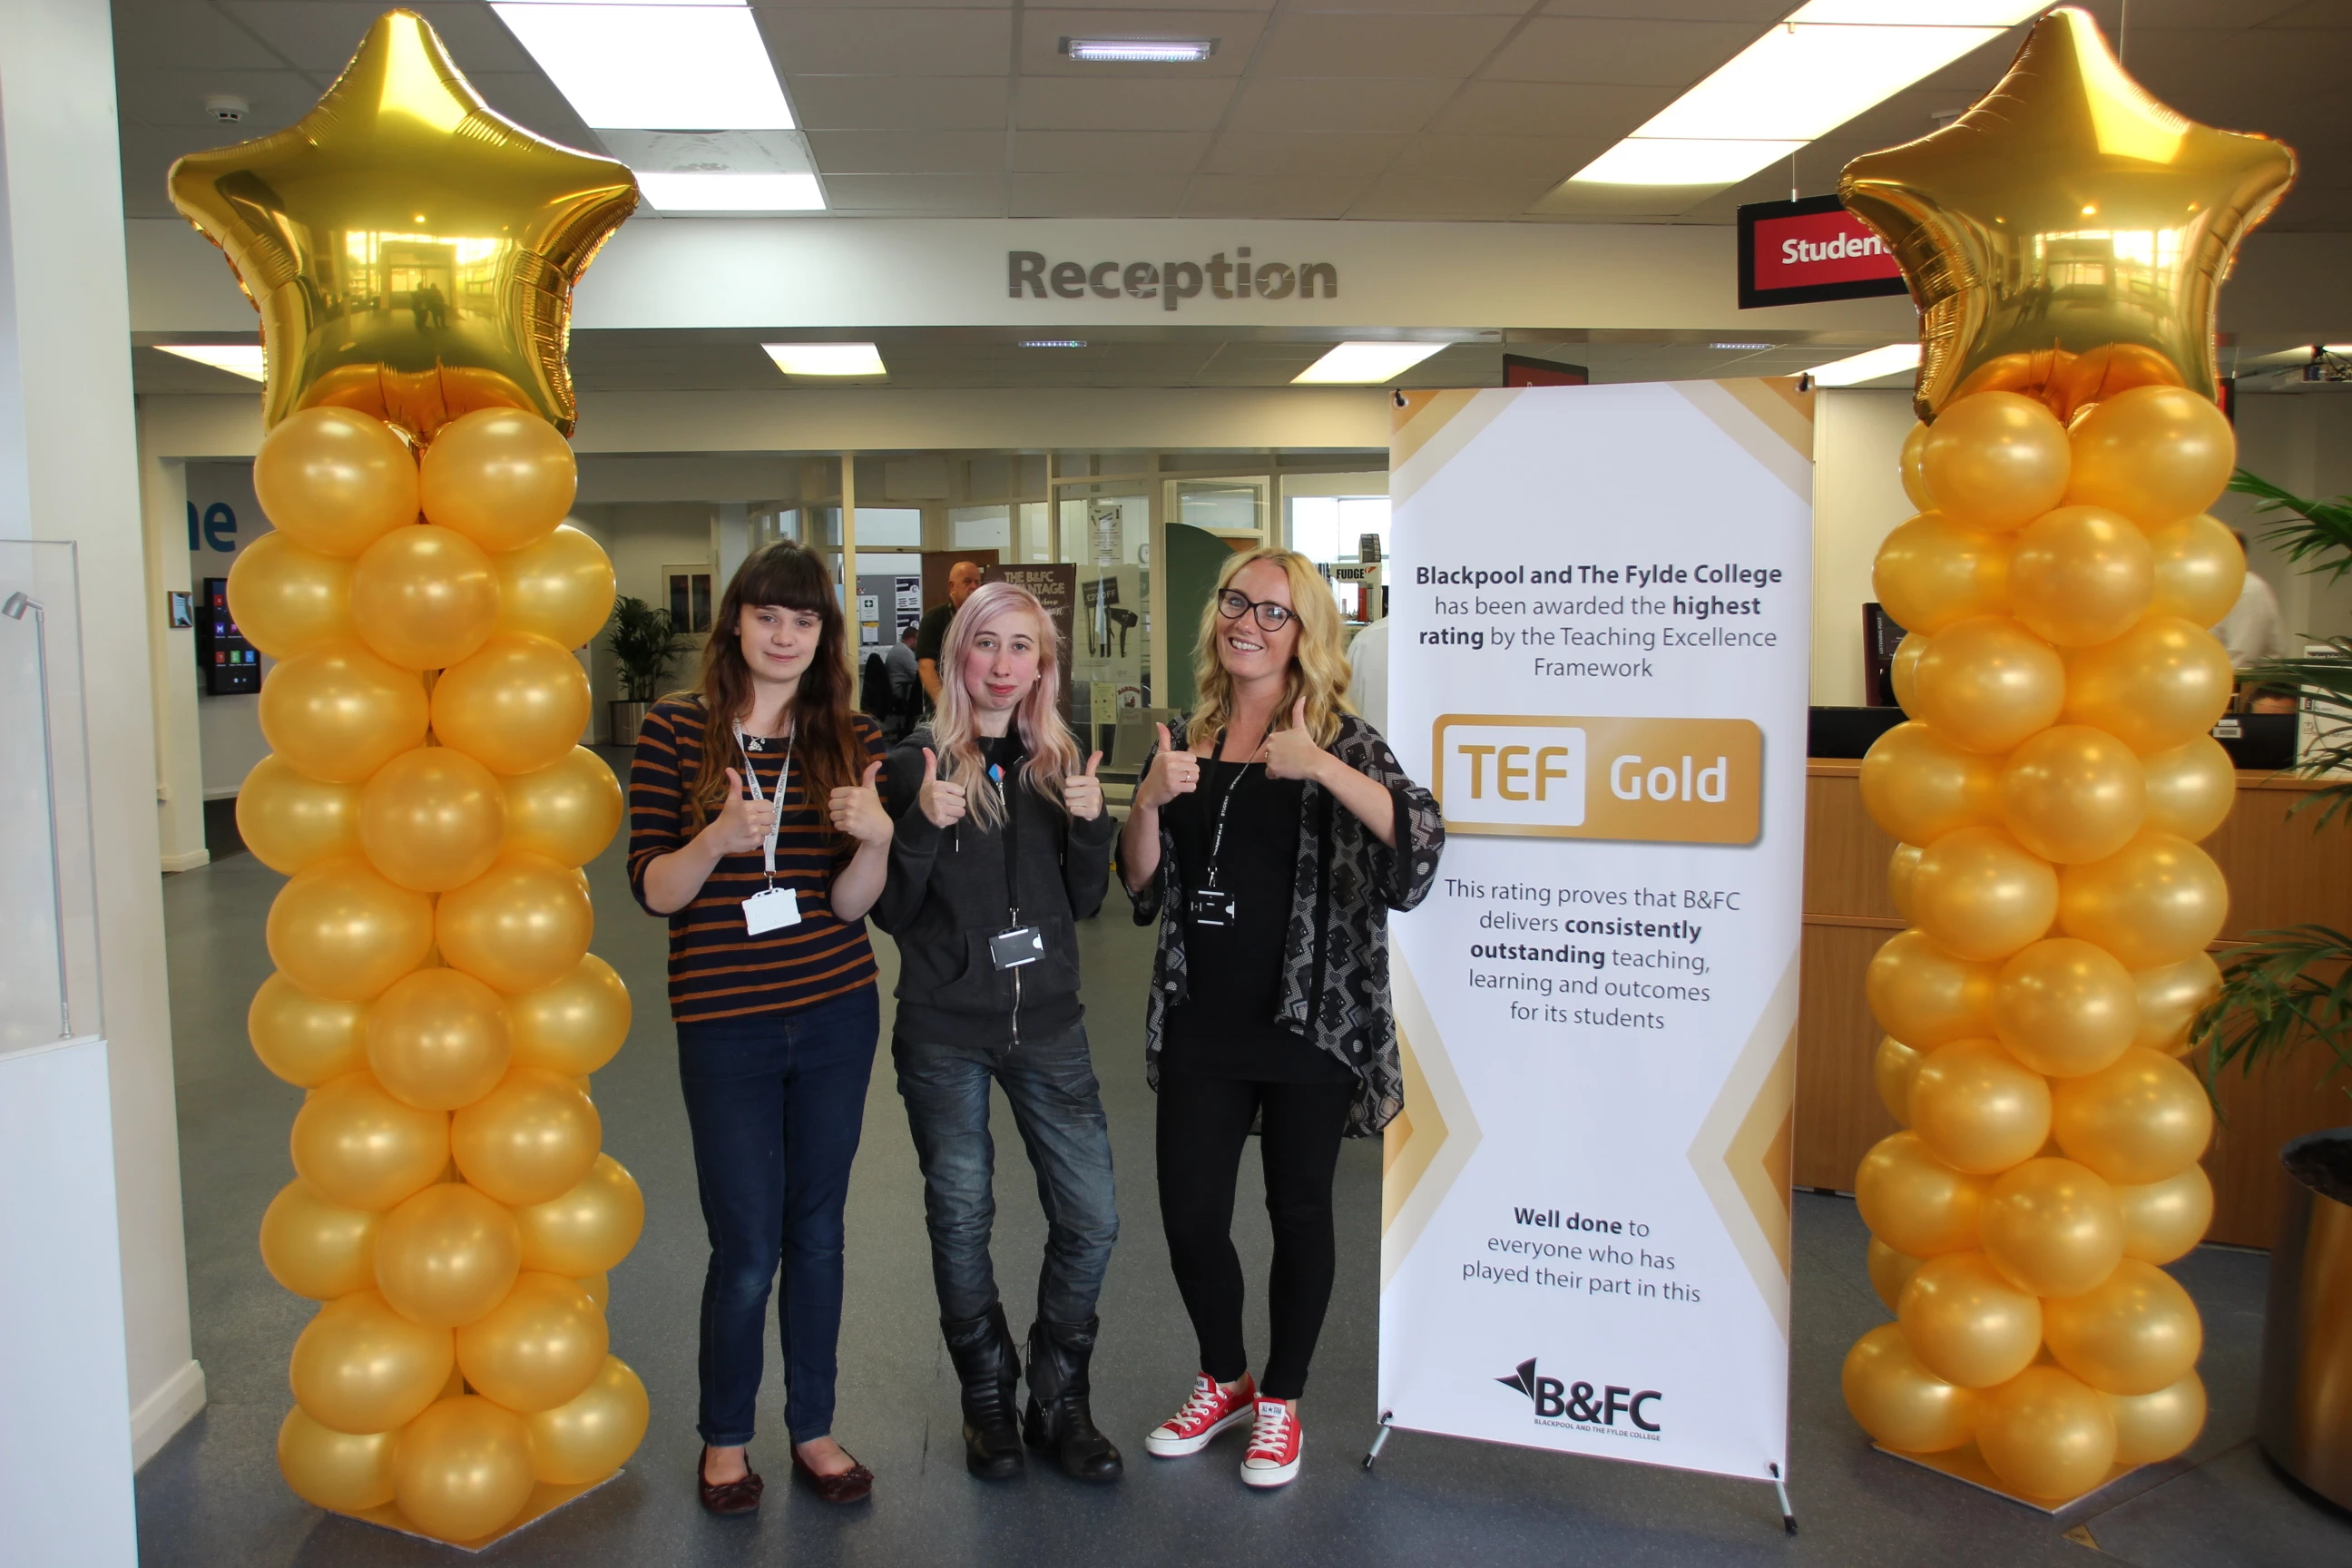 Applied Science HE students (l-r) Charlotte Scott-Parker, 21, from Fleetwood, Nikki Kirkbride, 24, from Blackpool, and Jemma Stevens, 33, from Blackpool, celebrating B&FC’s gold rating from the Teaching Excellence Framework 